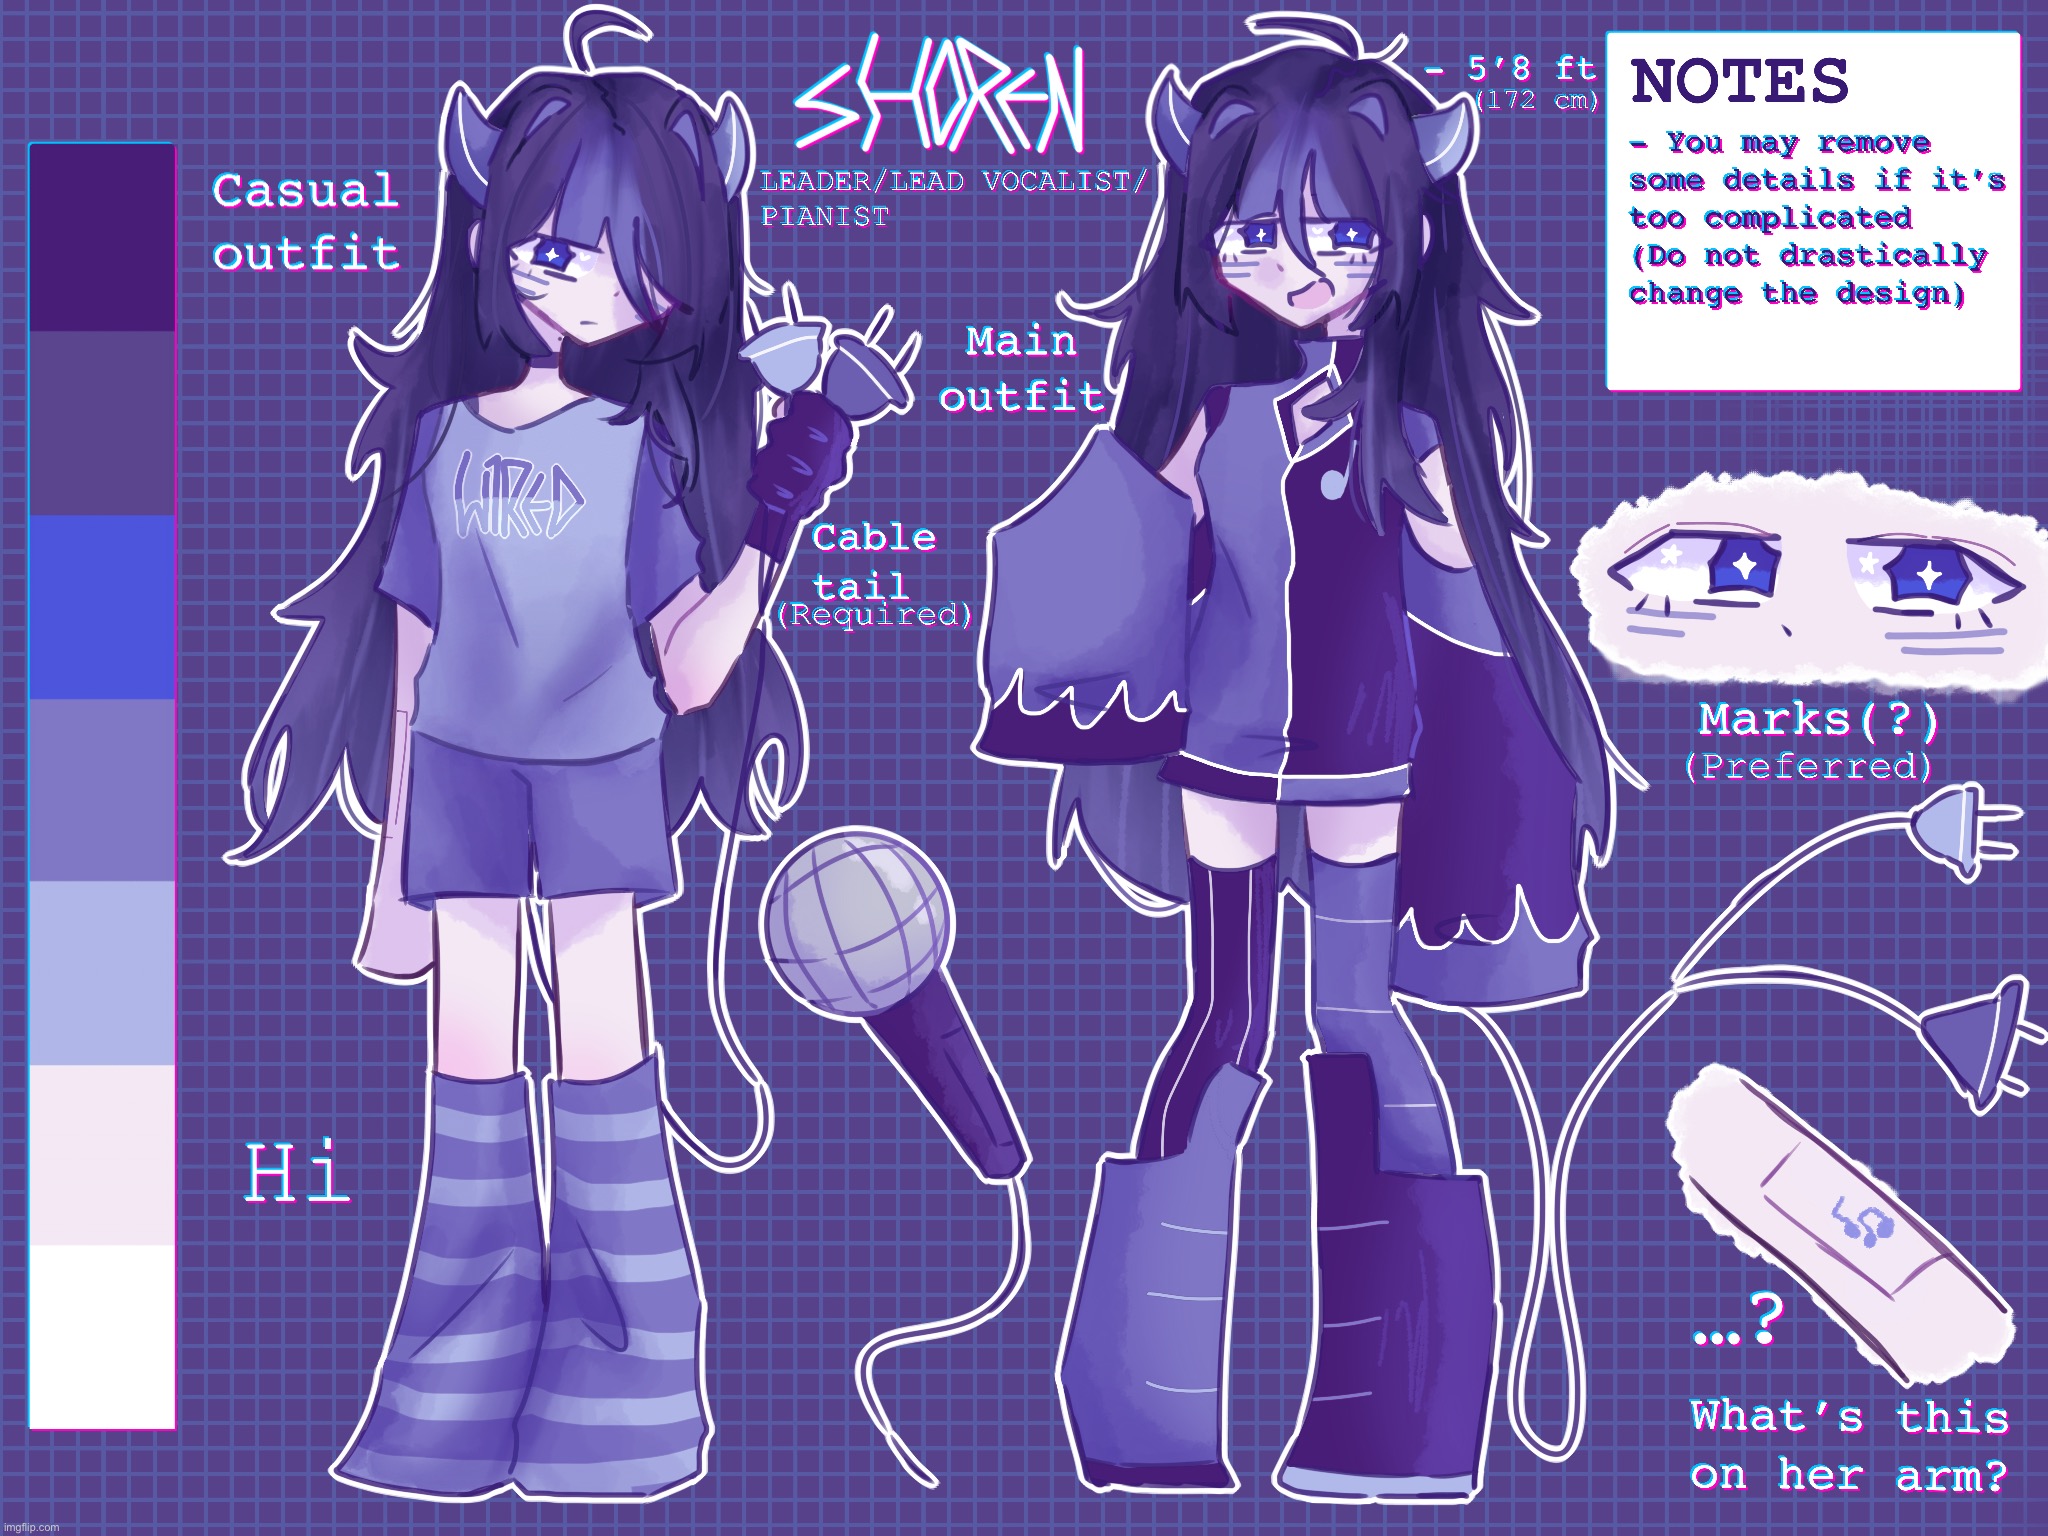 DONE WITH THE REFS! But I still have many other works… (info in image desc) | [ABOUT] SHE/HER, HUMAN AND PARTIALLY A ROBOT (BUT NOT EXACTLY AN AI? SOME OF HER BODY PARTS ARE ROBOTIC), 25, LEADER, PIANIST AND VOCALIST | HER ALIAS/STAGE NAME IS SHOREN AND HER REAL NAME IS YULIX. HER BANDMATES SOMETIMES CALL HER BY YUL, SHO, OR YULIX. BEING THE ONLY ONE IN THE GROUP WHO IS ABLE TO SOCIALIZE, SHE DOES 85% ON BEHALF THE BAND. BUT SHE’S NOT VERY EXTROVERTED AND IS QUITE LOFTY AT TIMES. DESPITE HER FRIENDLY APPEARANCE, SOMETIMES SHE IS LIKE THOSE SCARY LEADERS WHO YOU WANT TO AVOID, AND ALTER AND RAVEL TEND TO HAVE GREAT TEAMWORK AT AVOIDING HER AS IF SHE’S A ROAMING TIGER. SHE IS 2 FOOT TALLER THAN RAVEL. | made w/ Imgflip meme maker